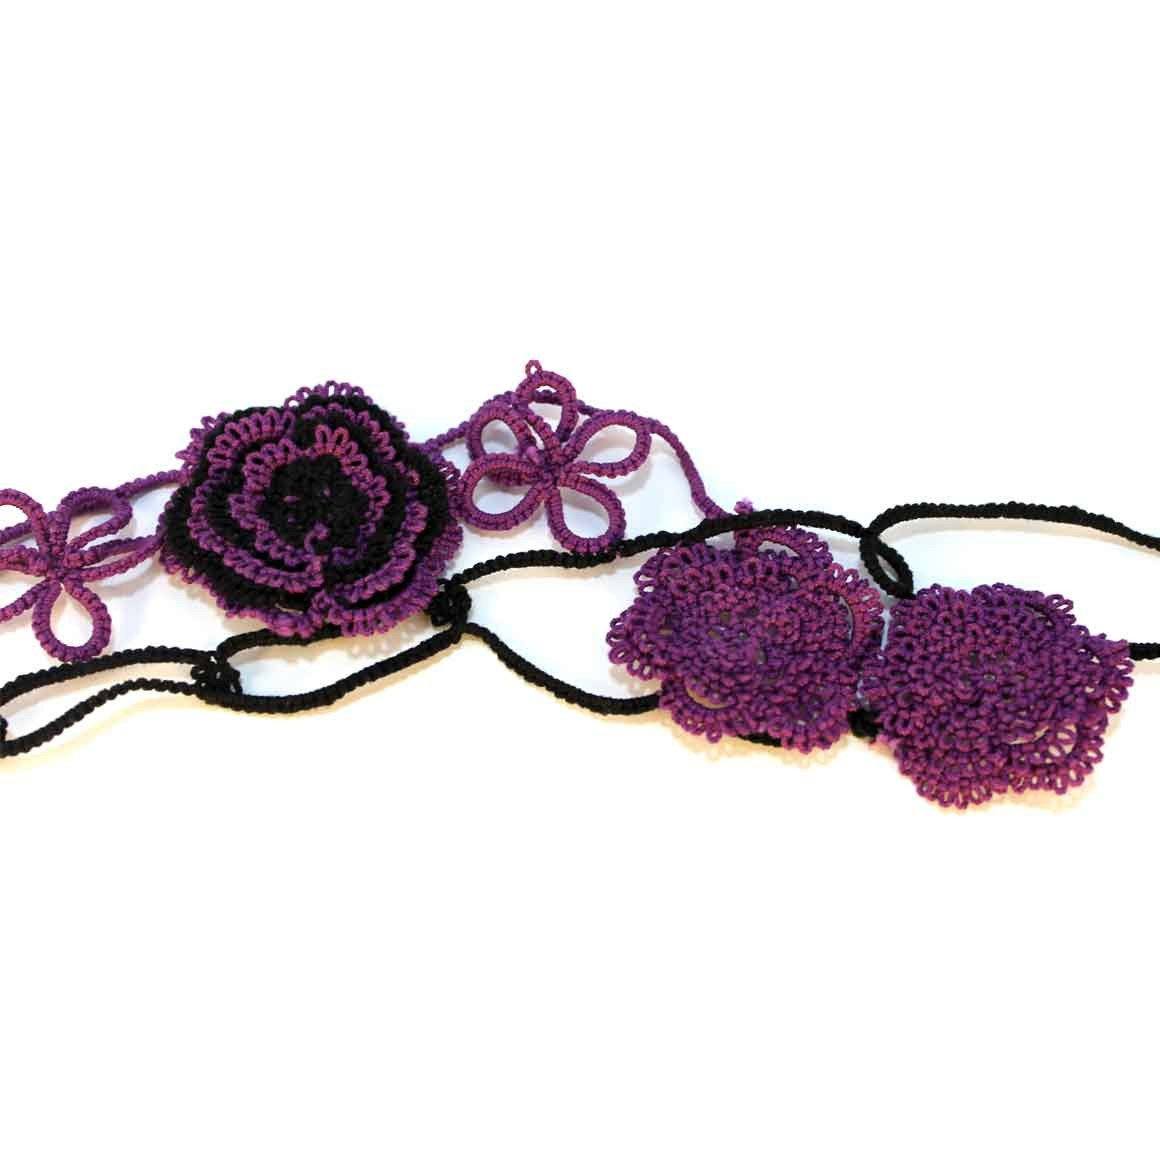 Fair Trade Ethical Tatted Headband Harmony Accessories Uplift Fair Trade 